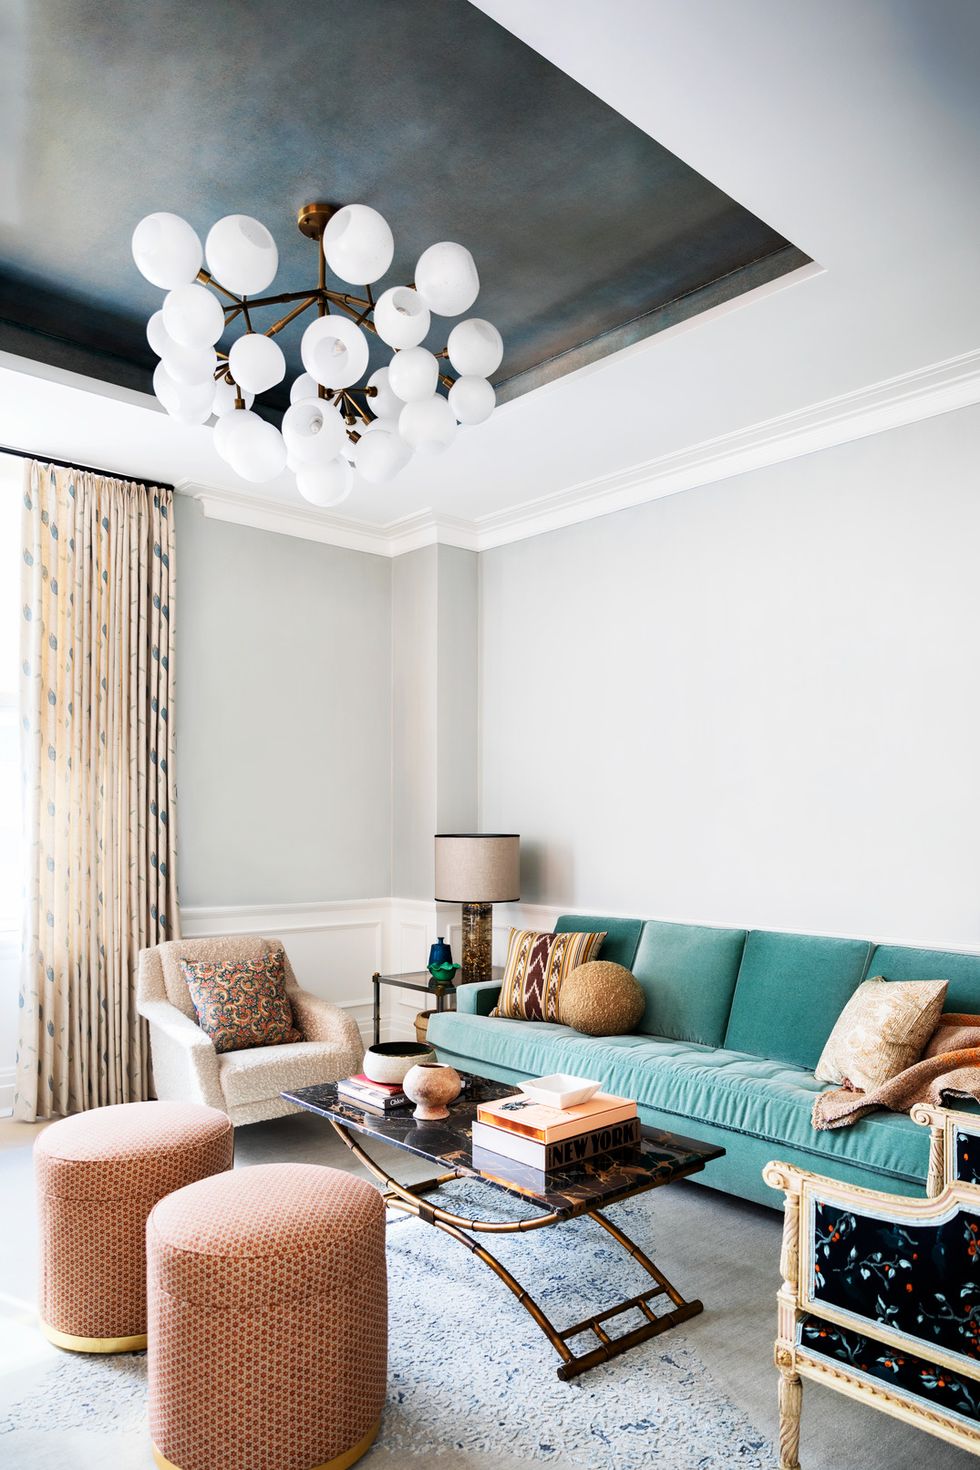 kati curtis design 9 new york city apartment with tray ceiling by designer kati curtis sputnik sphere chandelier by corrigan studio